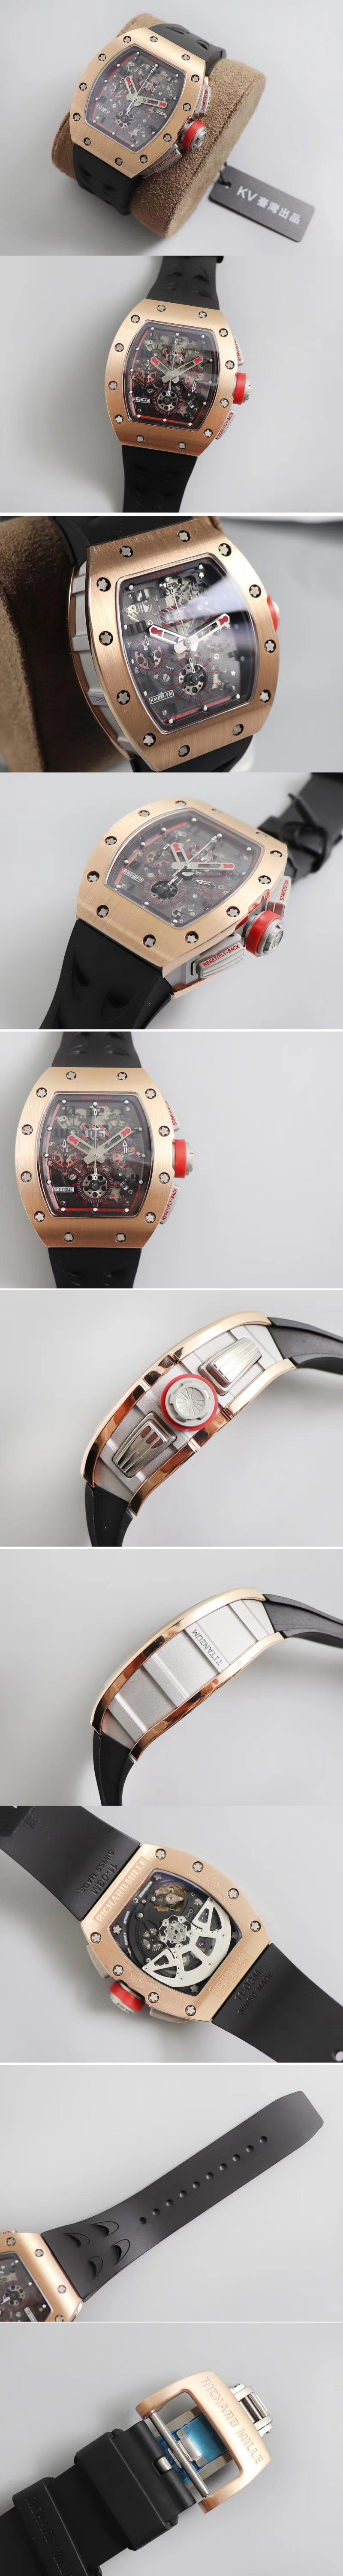 Replica Richard Mille RM011-FM Chronograph Rose Gold Case KVF 1:1 Best Edtion Crystal Skeleton Dial On Black Rubber Strap A7750